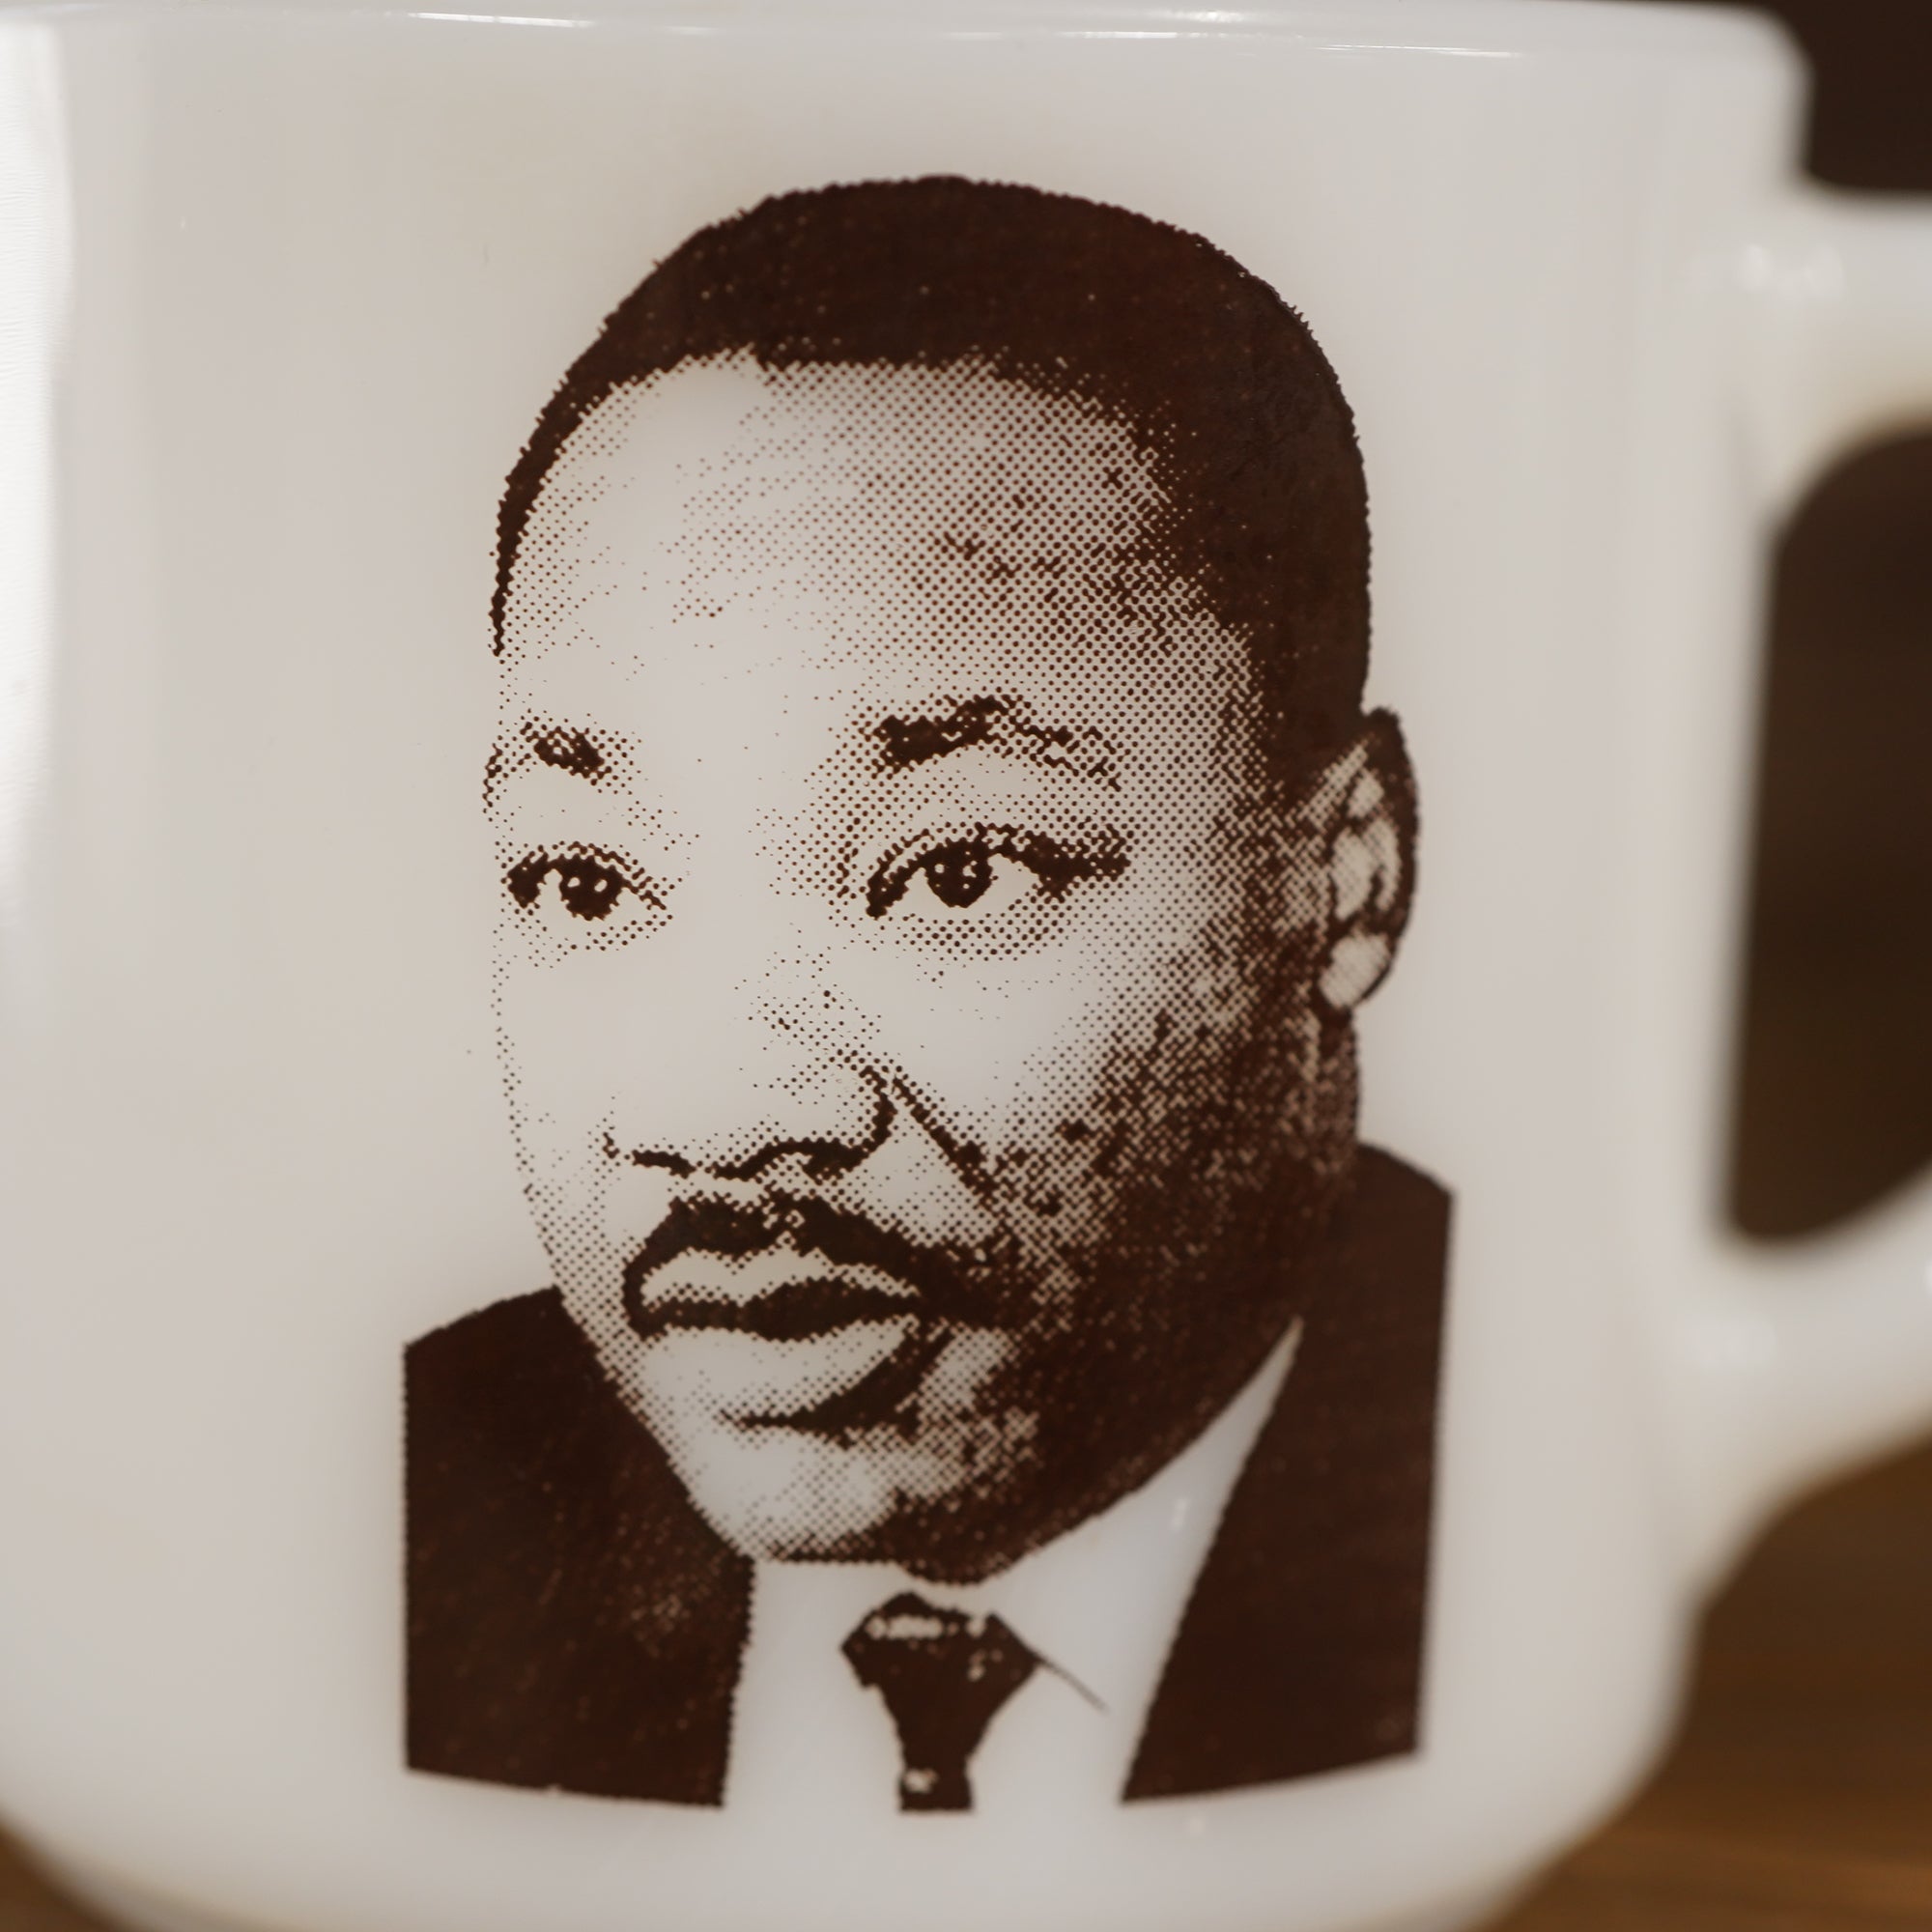 FEDERAL Martin Luther King Jr. キング牧師 マグカップ